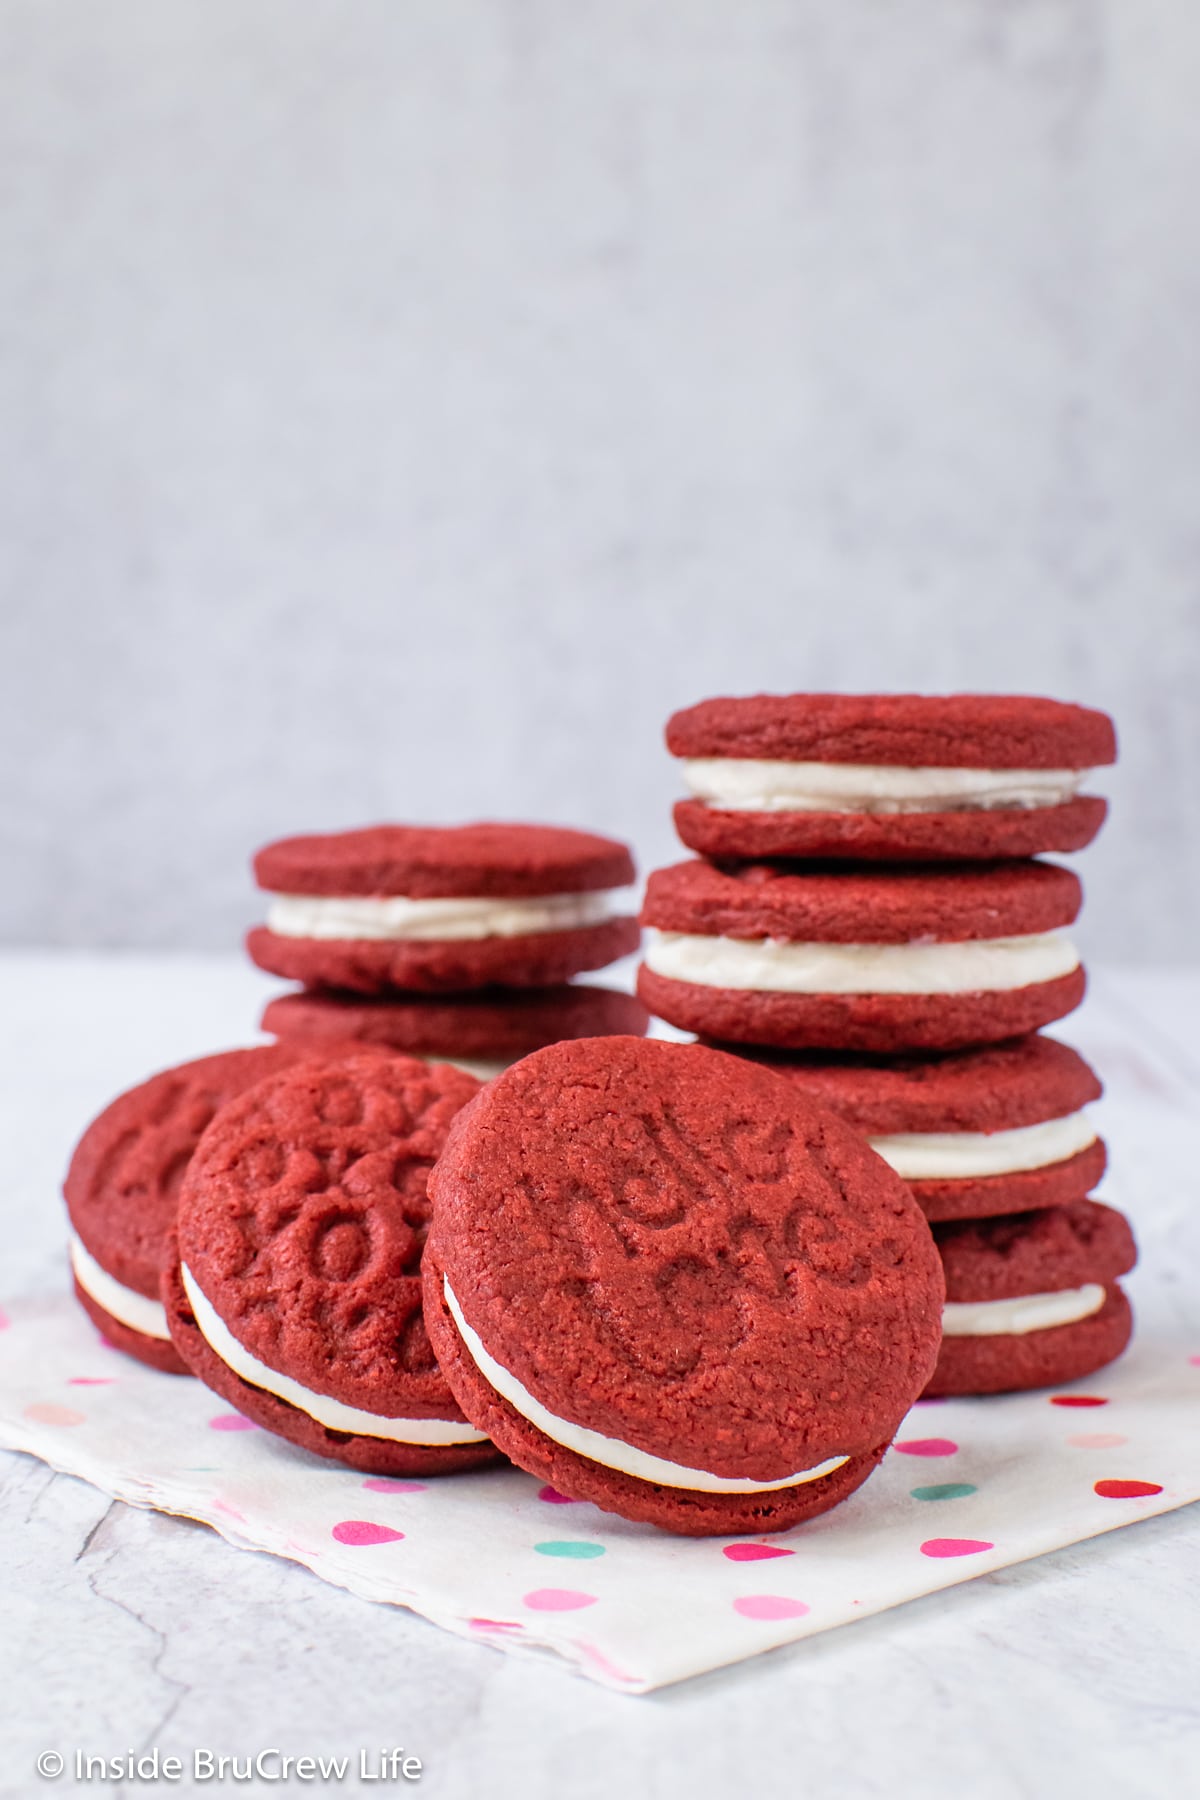 A pile of red sandwich cookies on a white napkin.